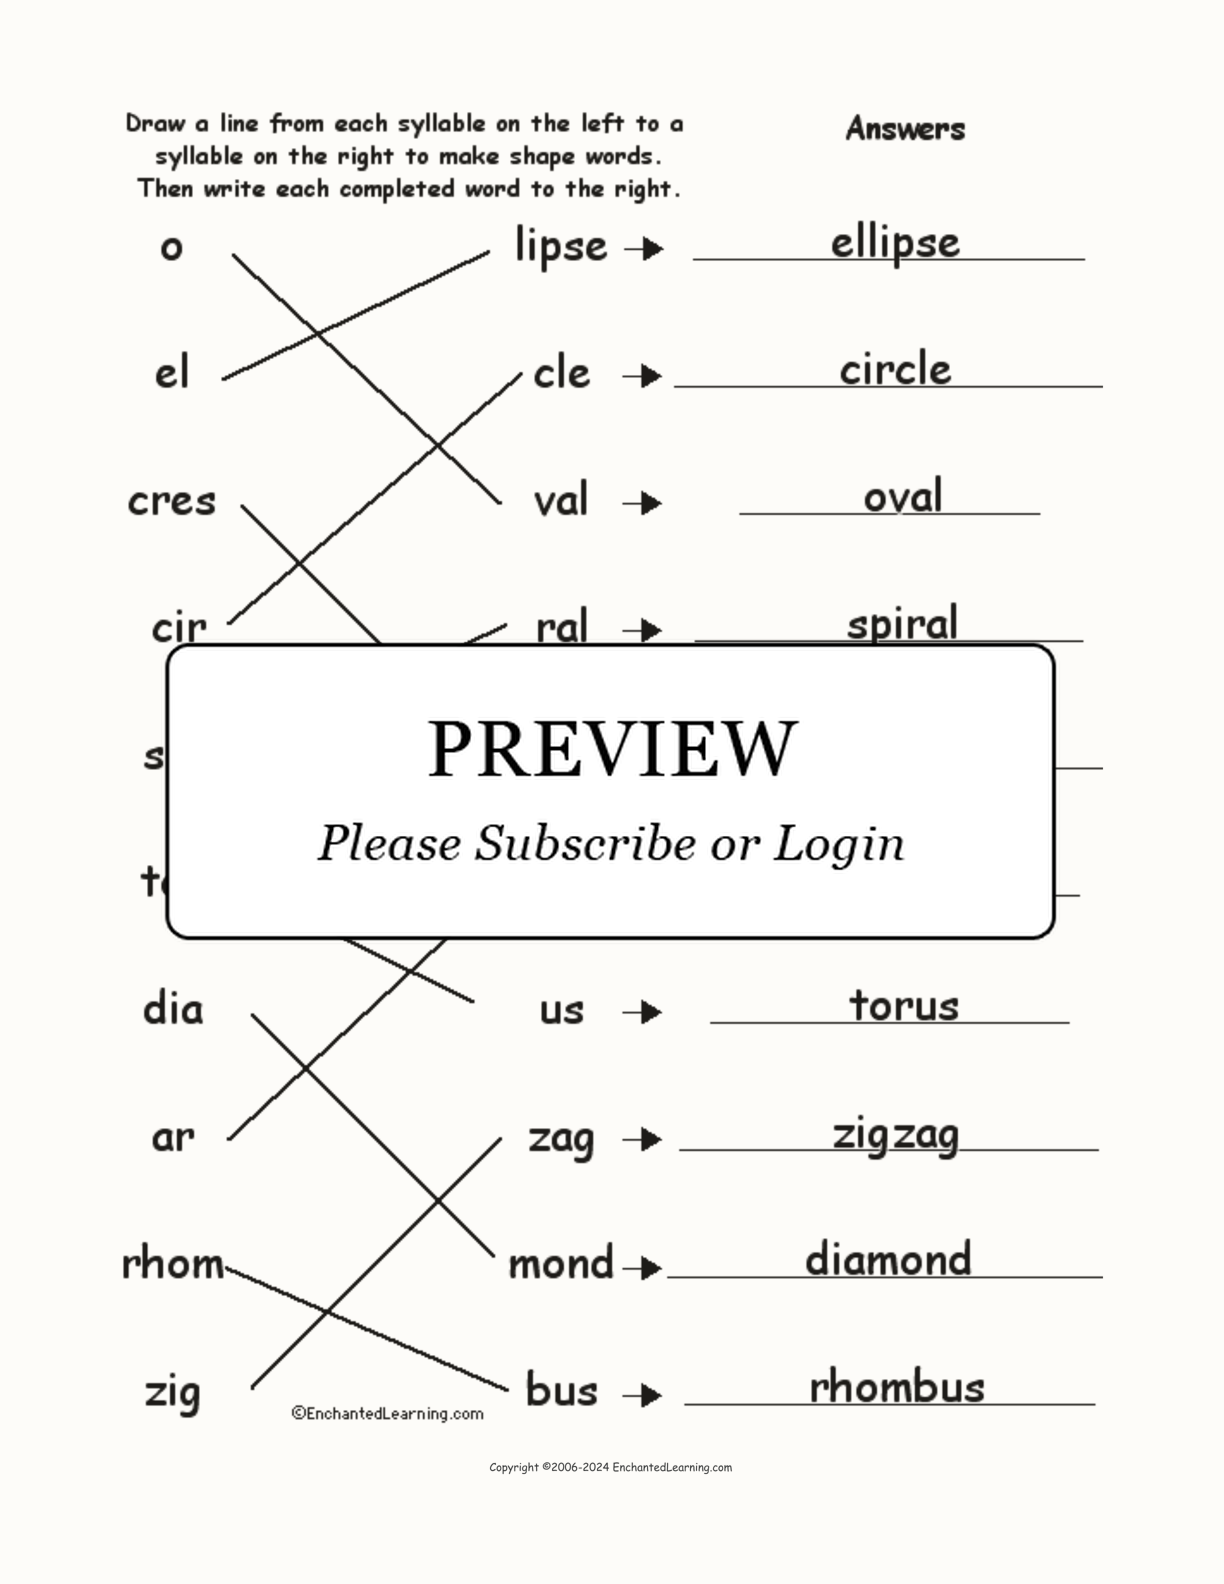 Match the Syllables: Shape Words interactive worksheet page 2